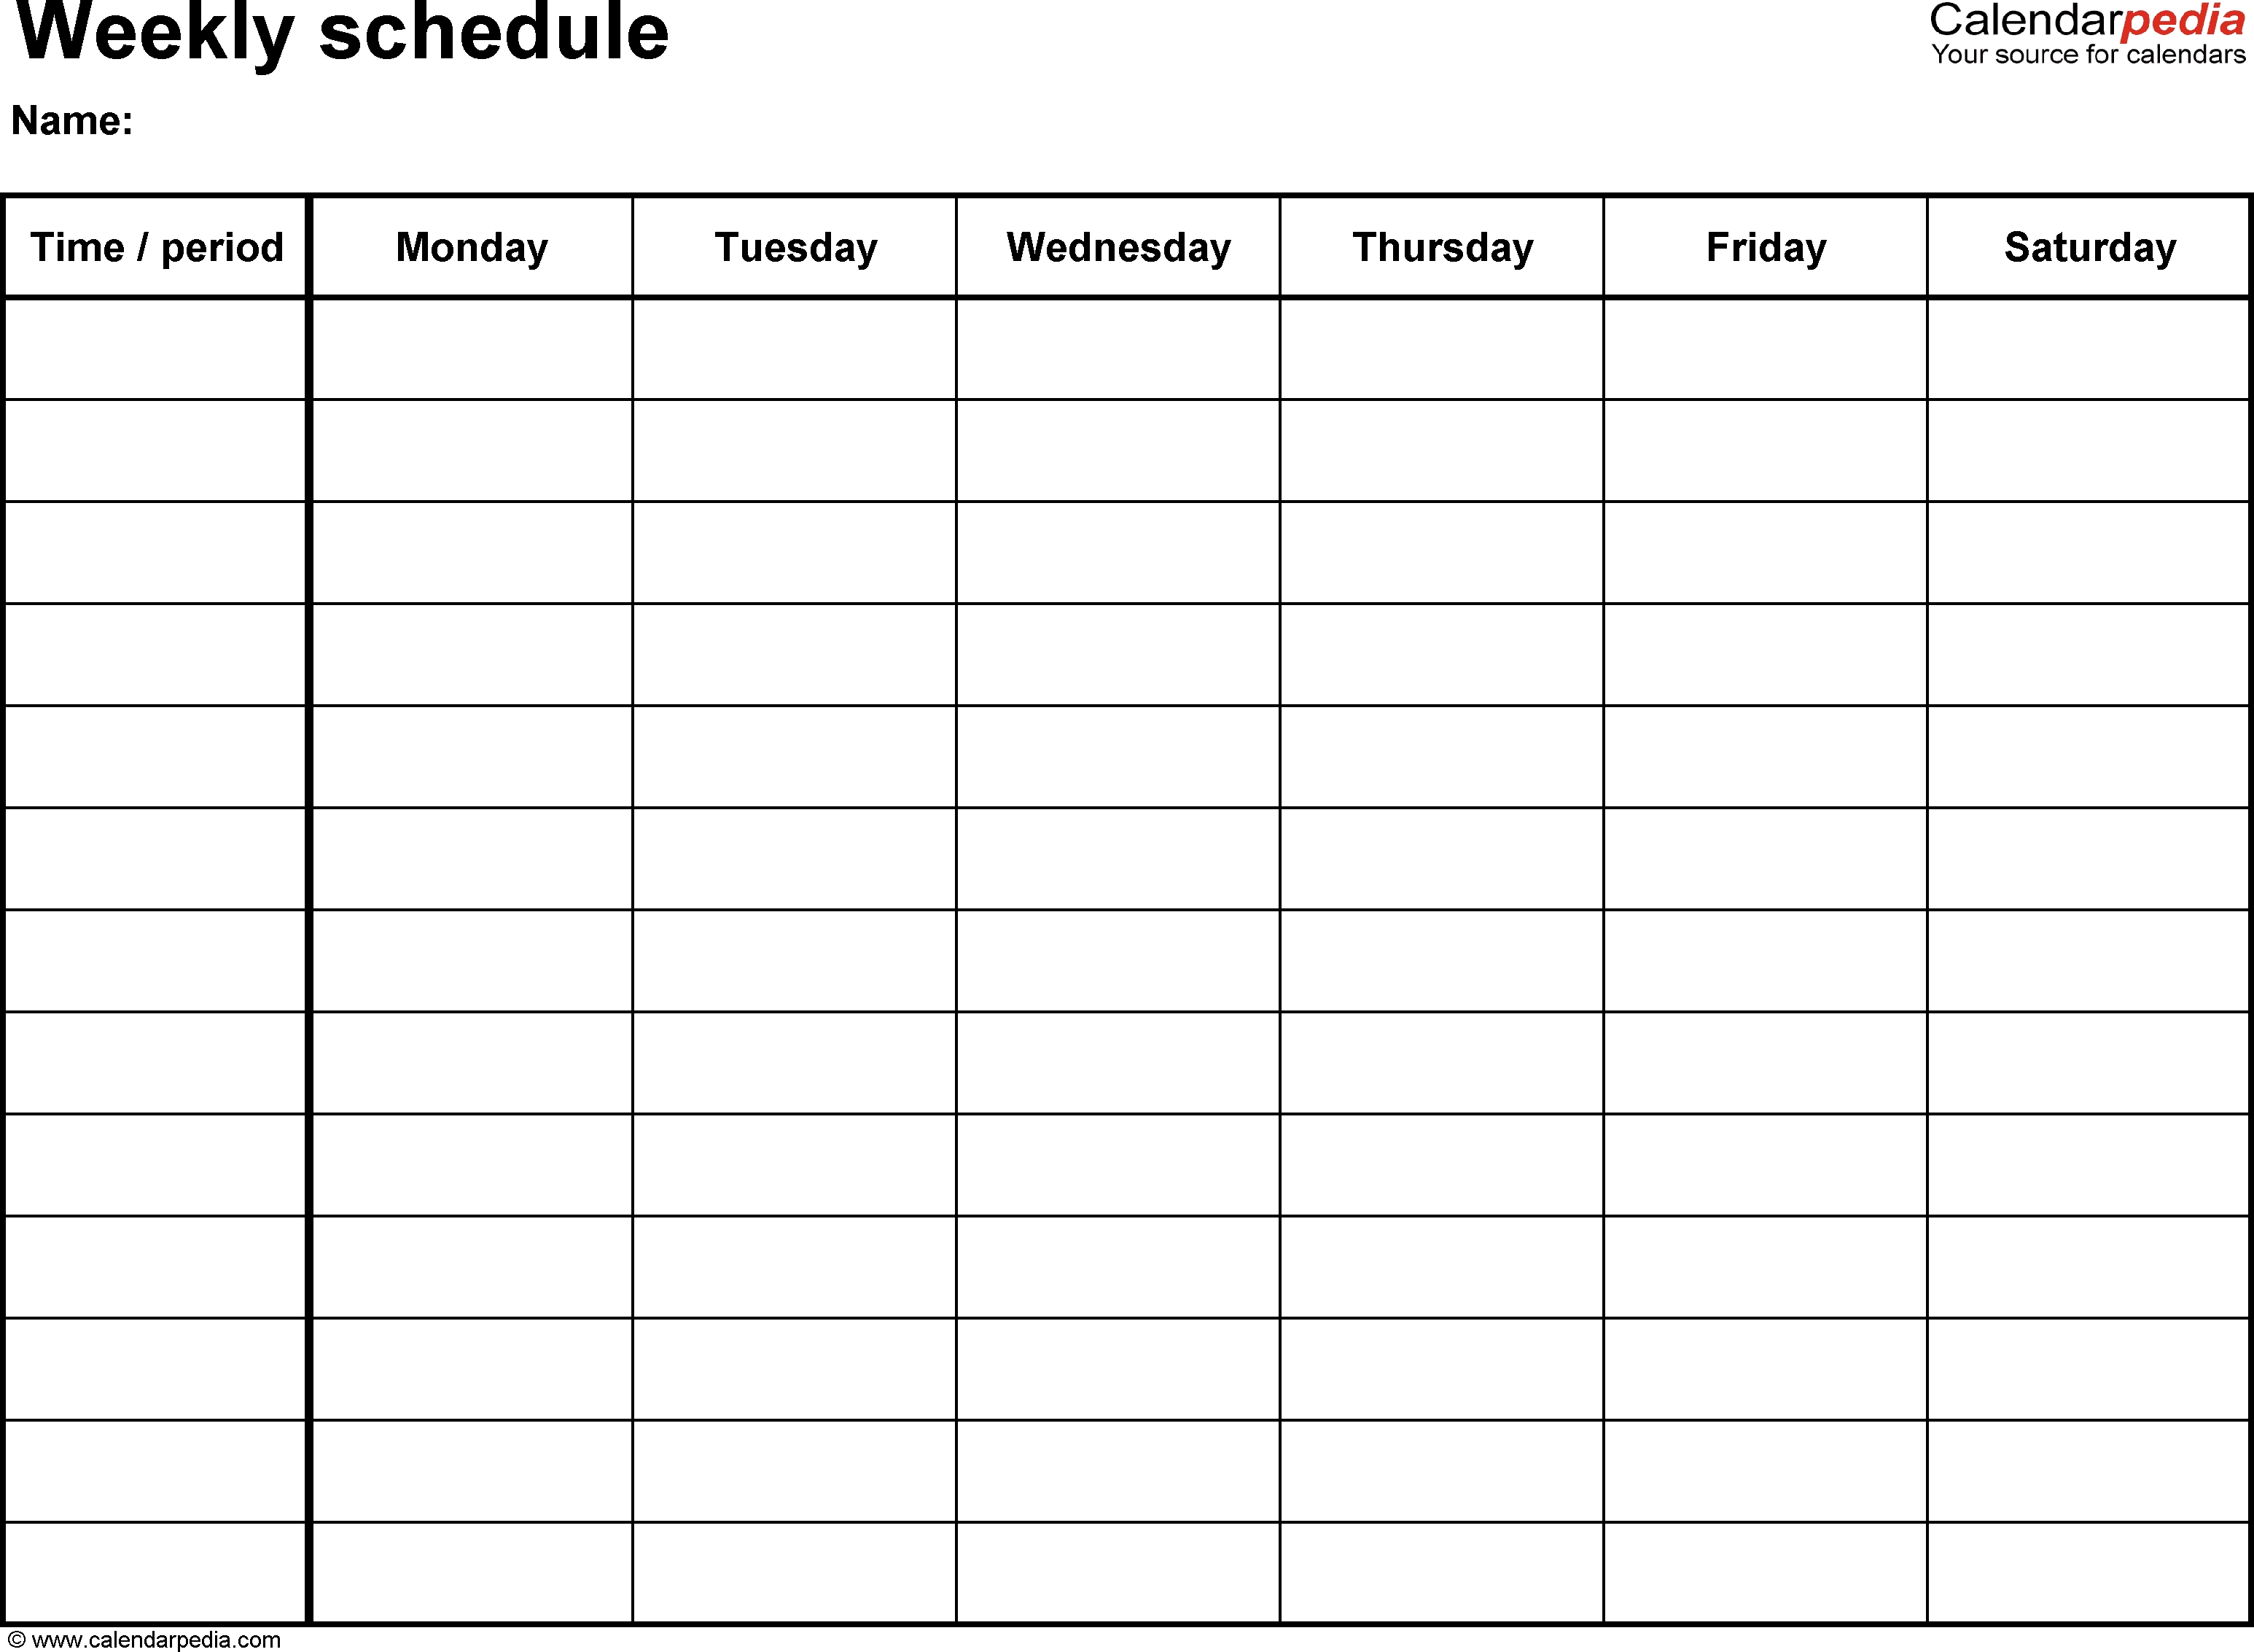 Free Weekly Schedule Templates For Word - 18 Templates in 6 Week Blank Calendar Template